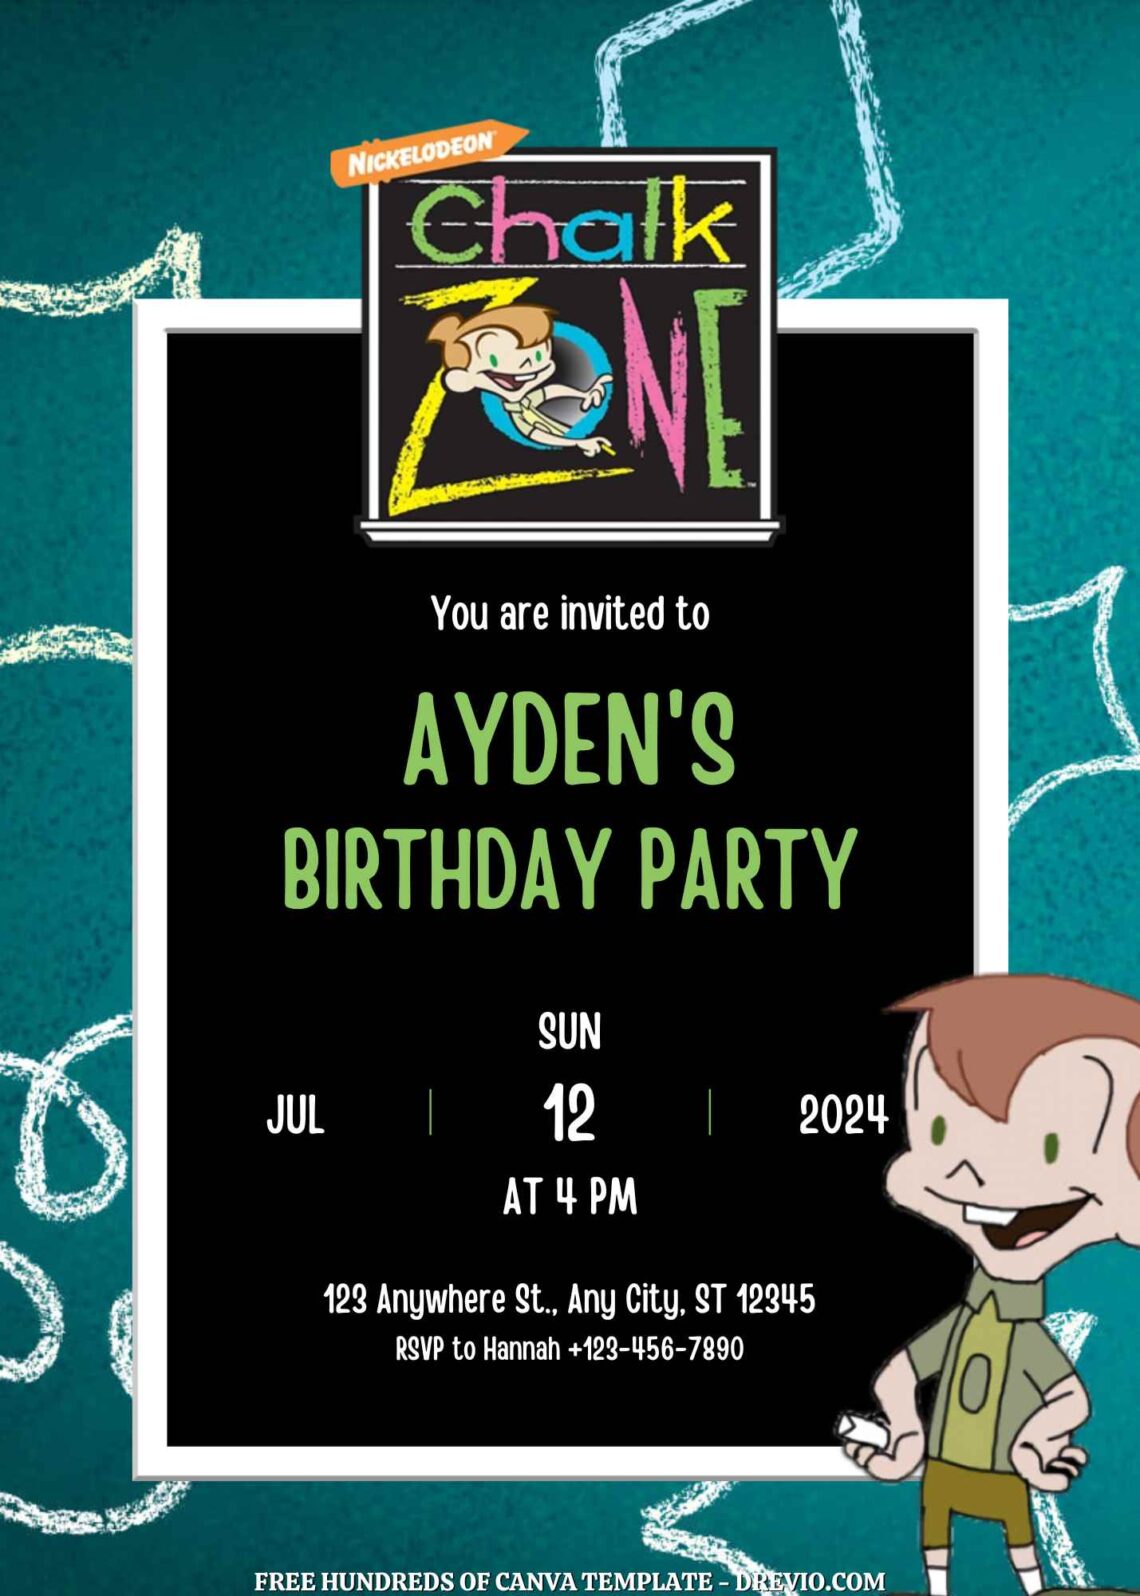 Free ChalkZone Birthday Invitation Templates with Board in the Background